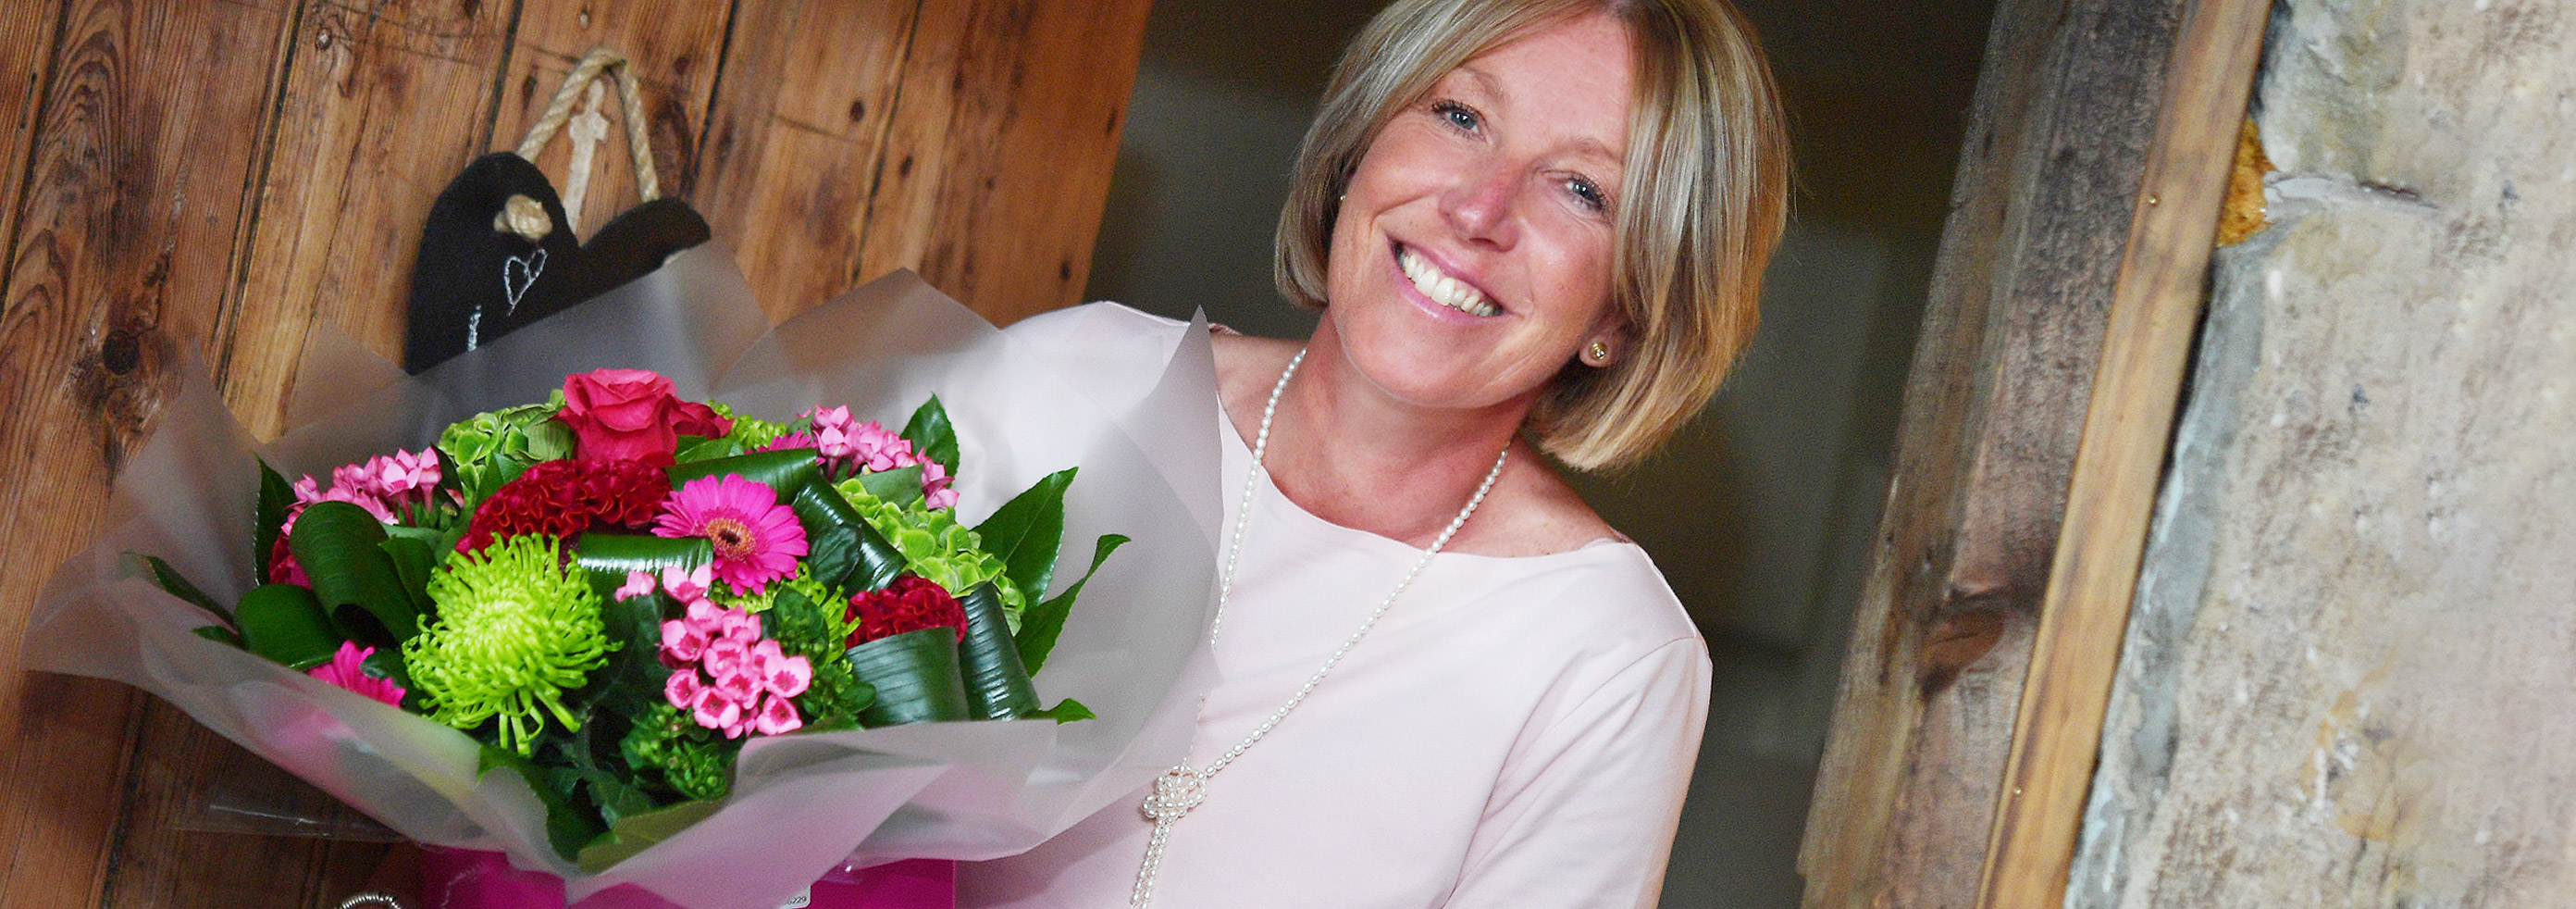 Lifting the mood with vibrant flowers delivered by a local florist